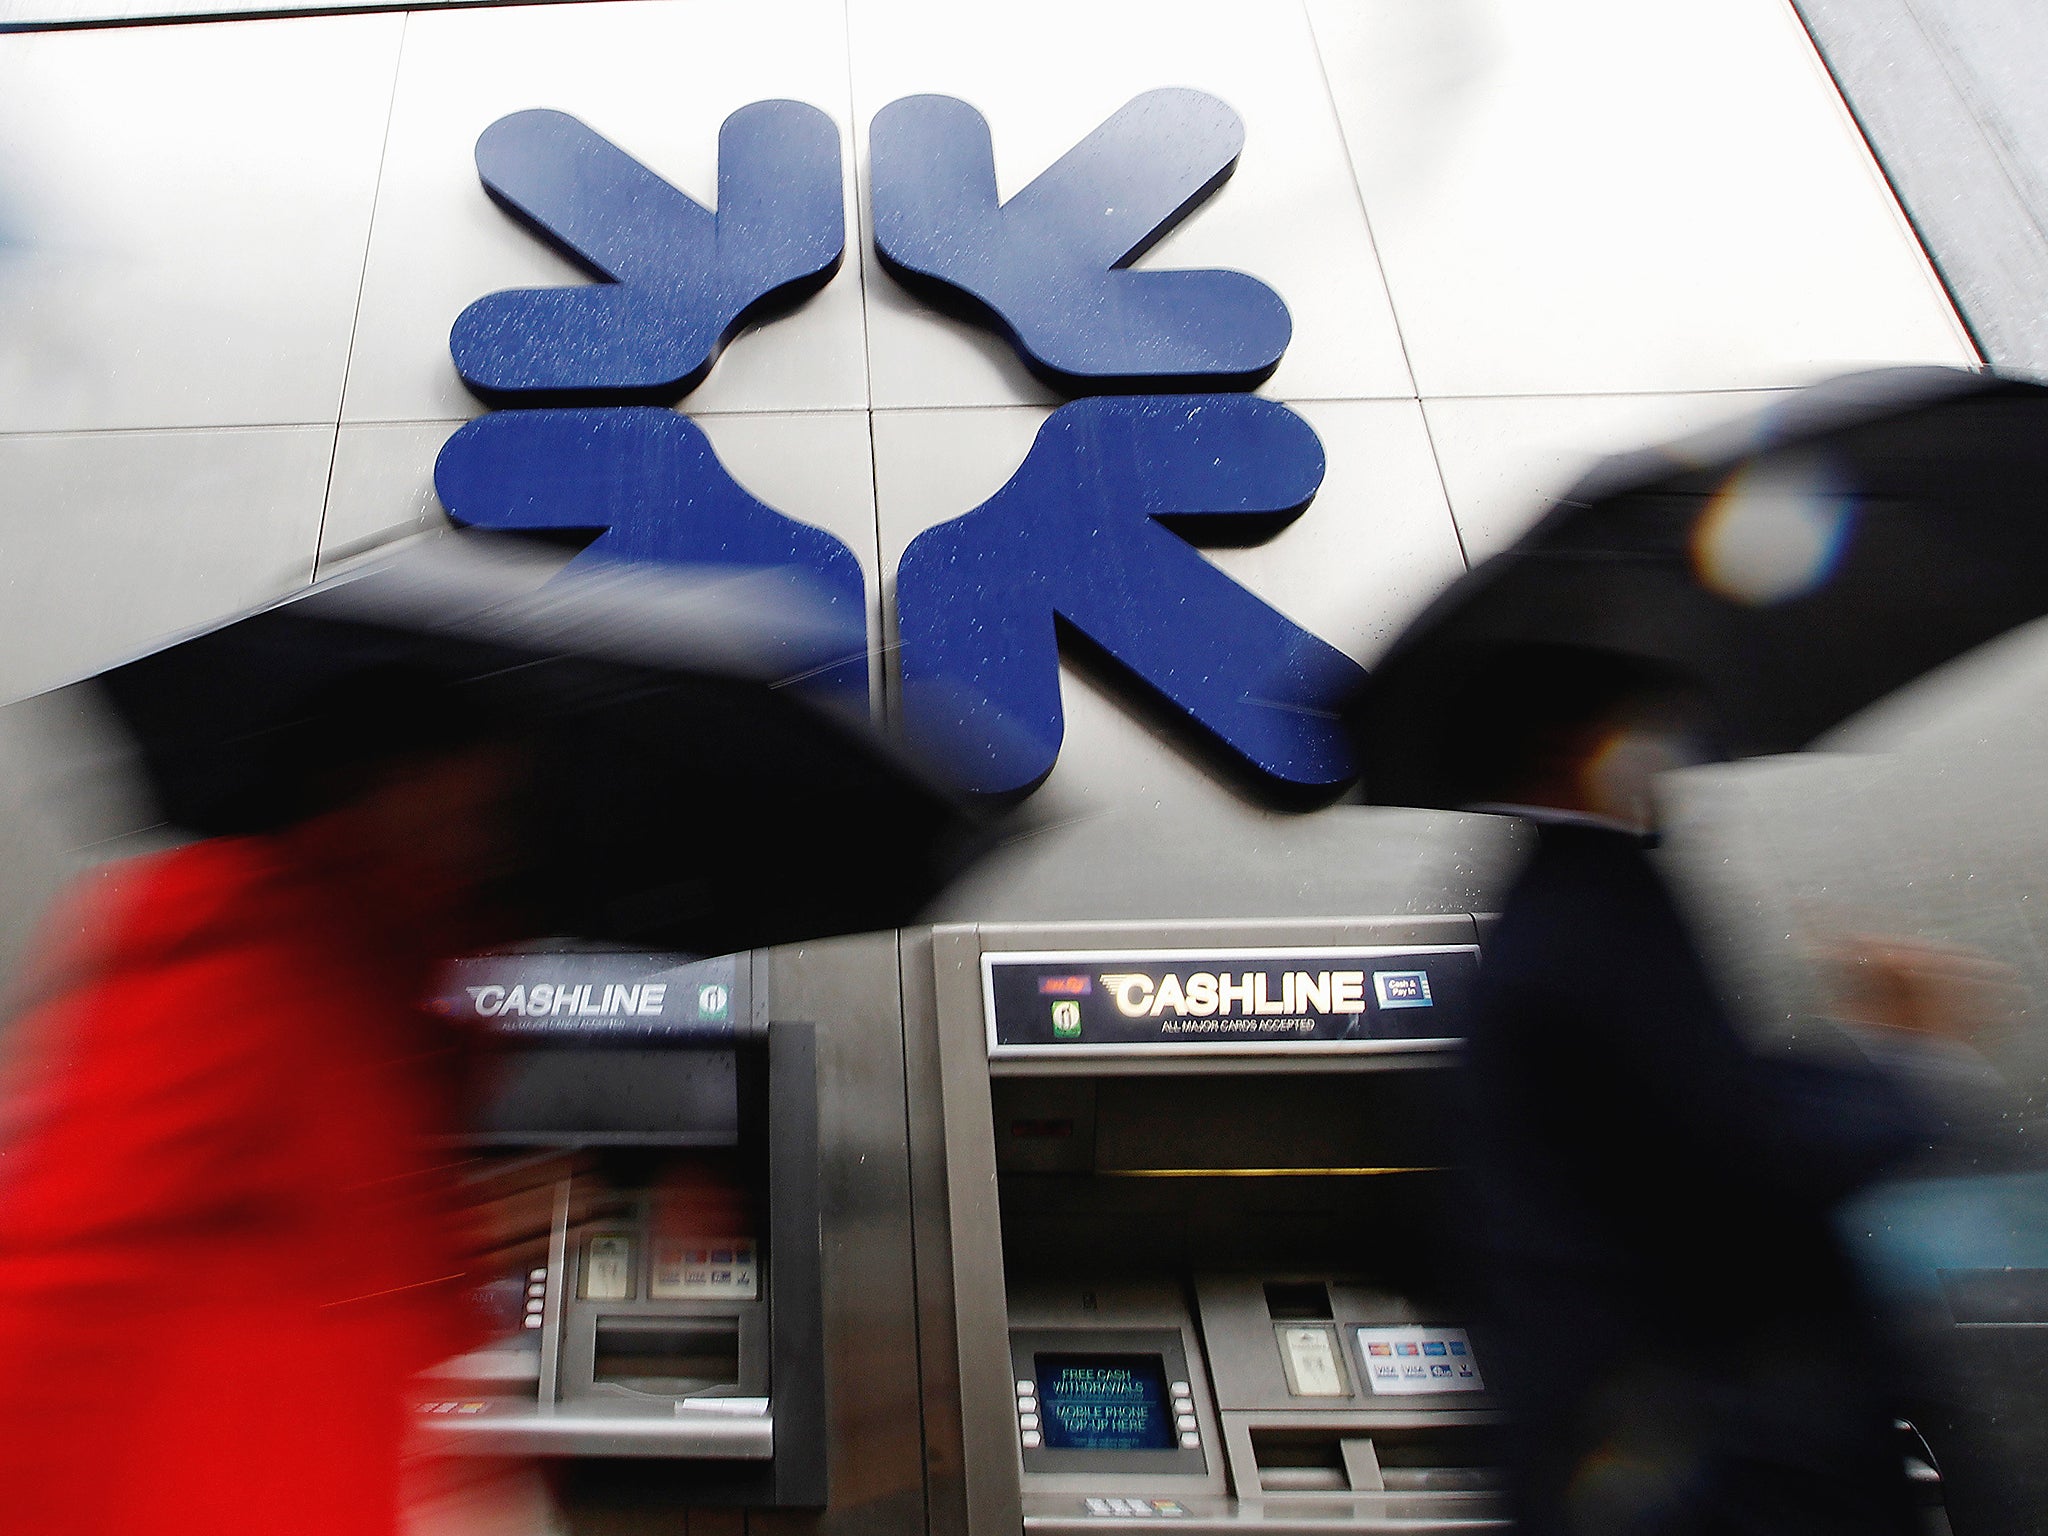 RBS is the sixth bank to settle similar claims by New York